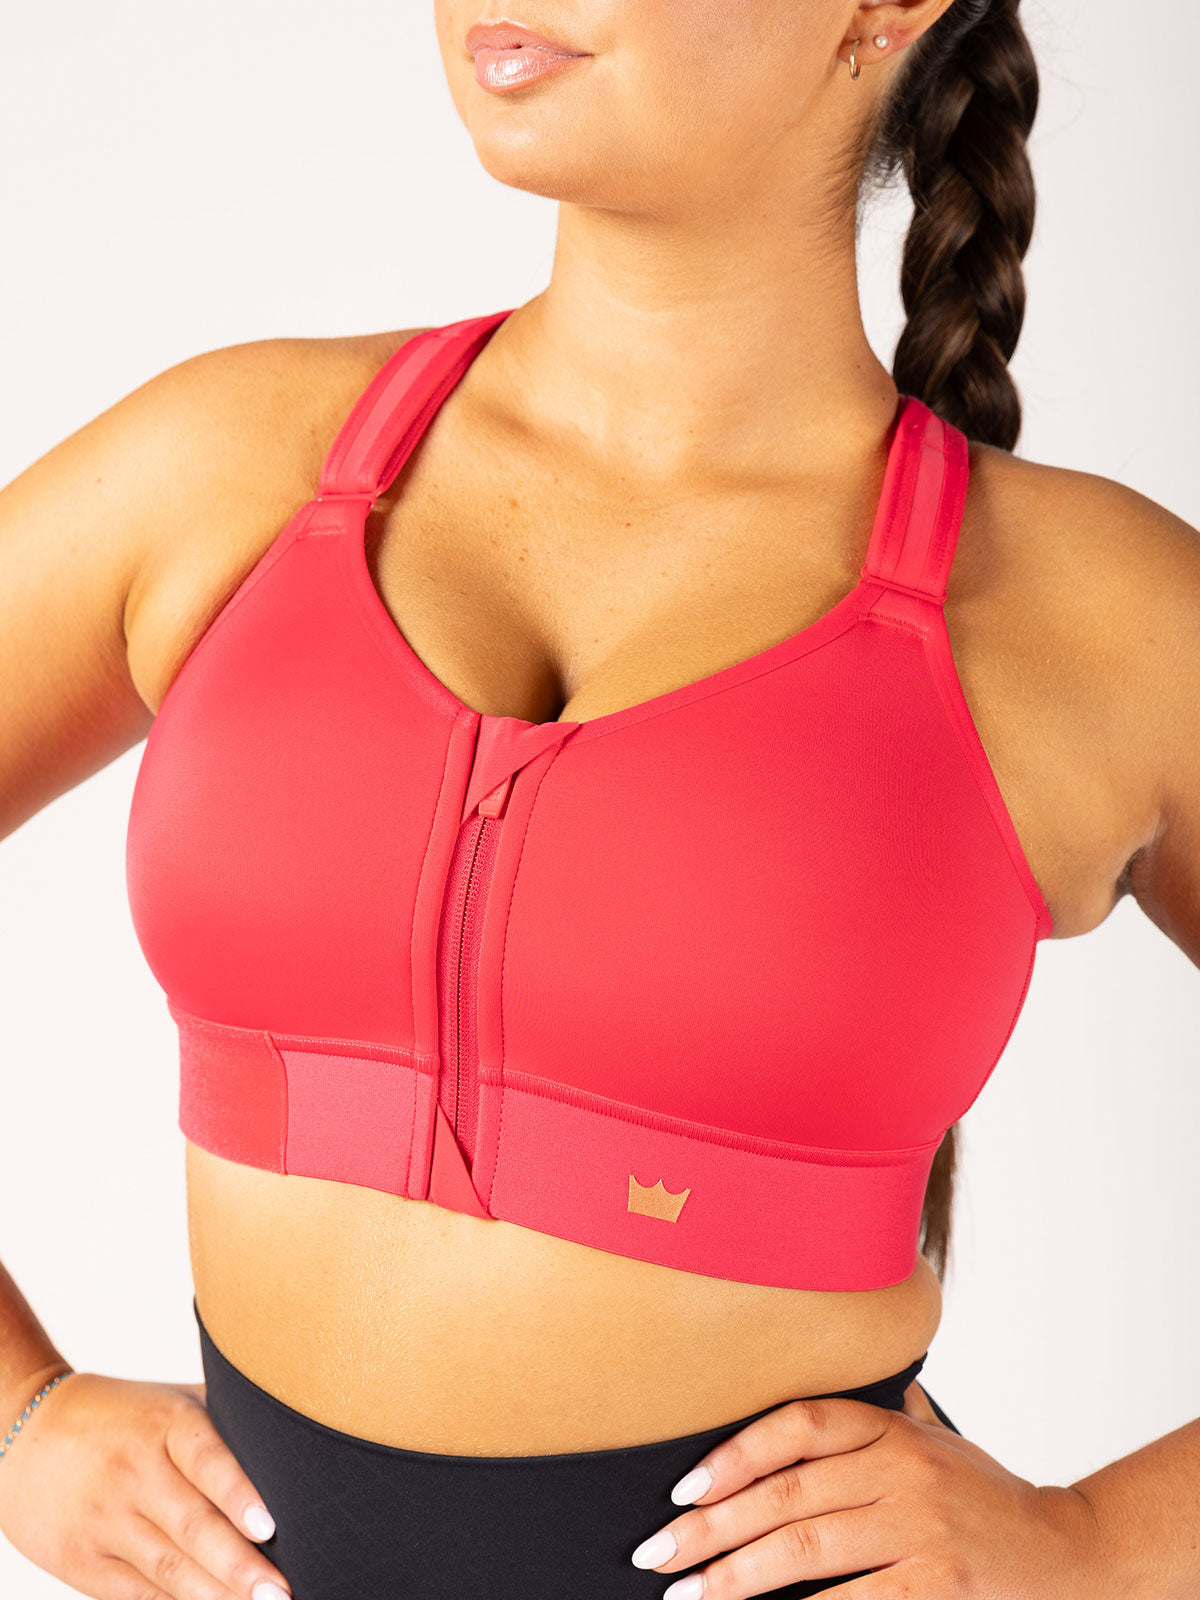 FIGS- sports-bra / new with tags.